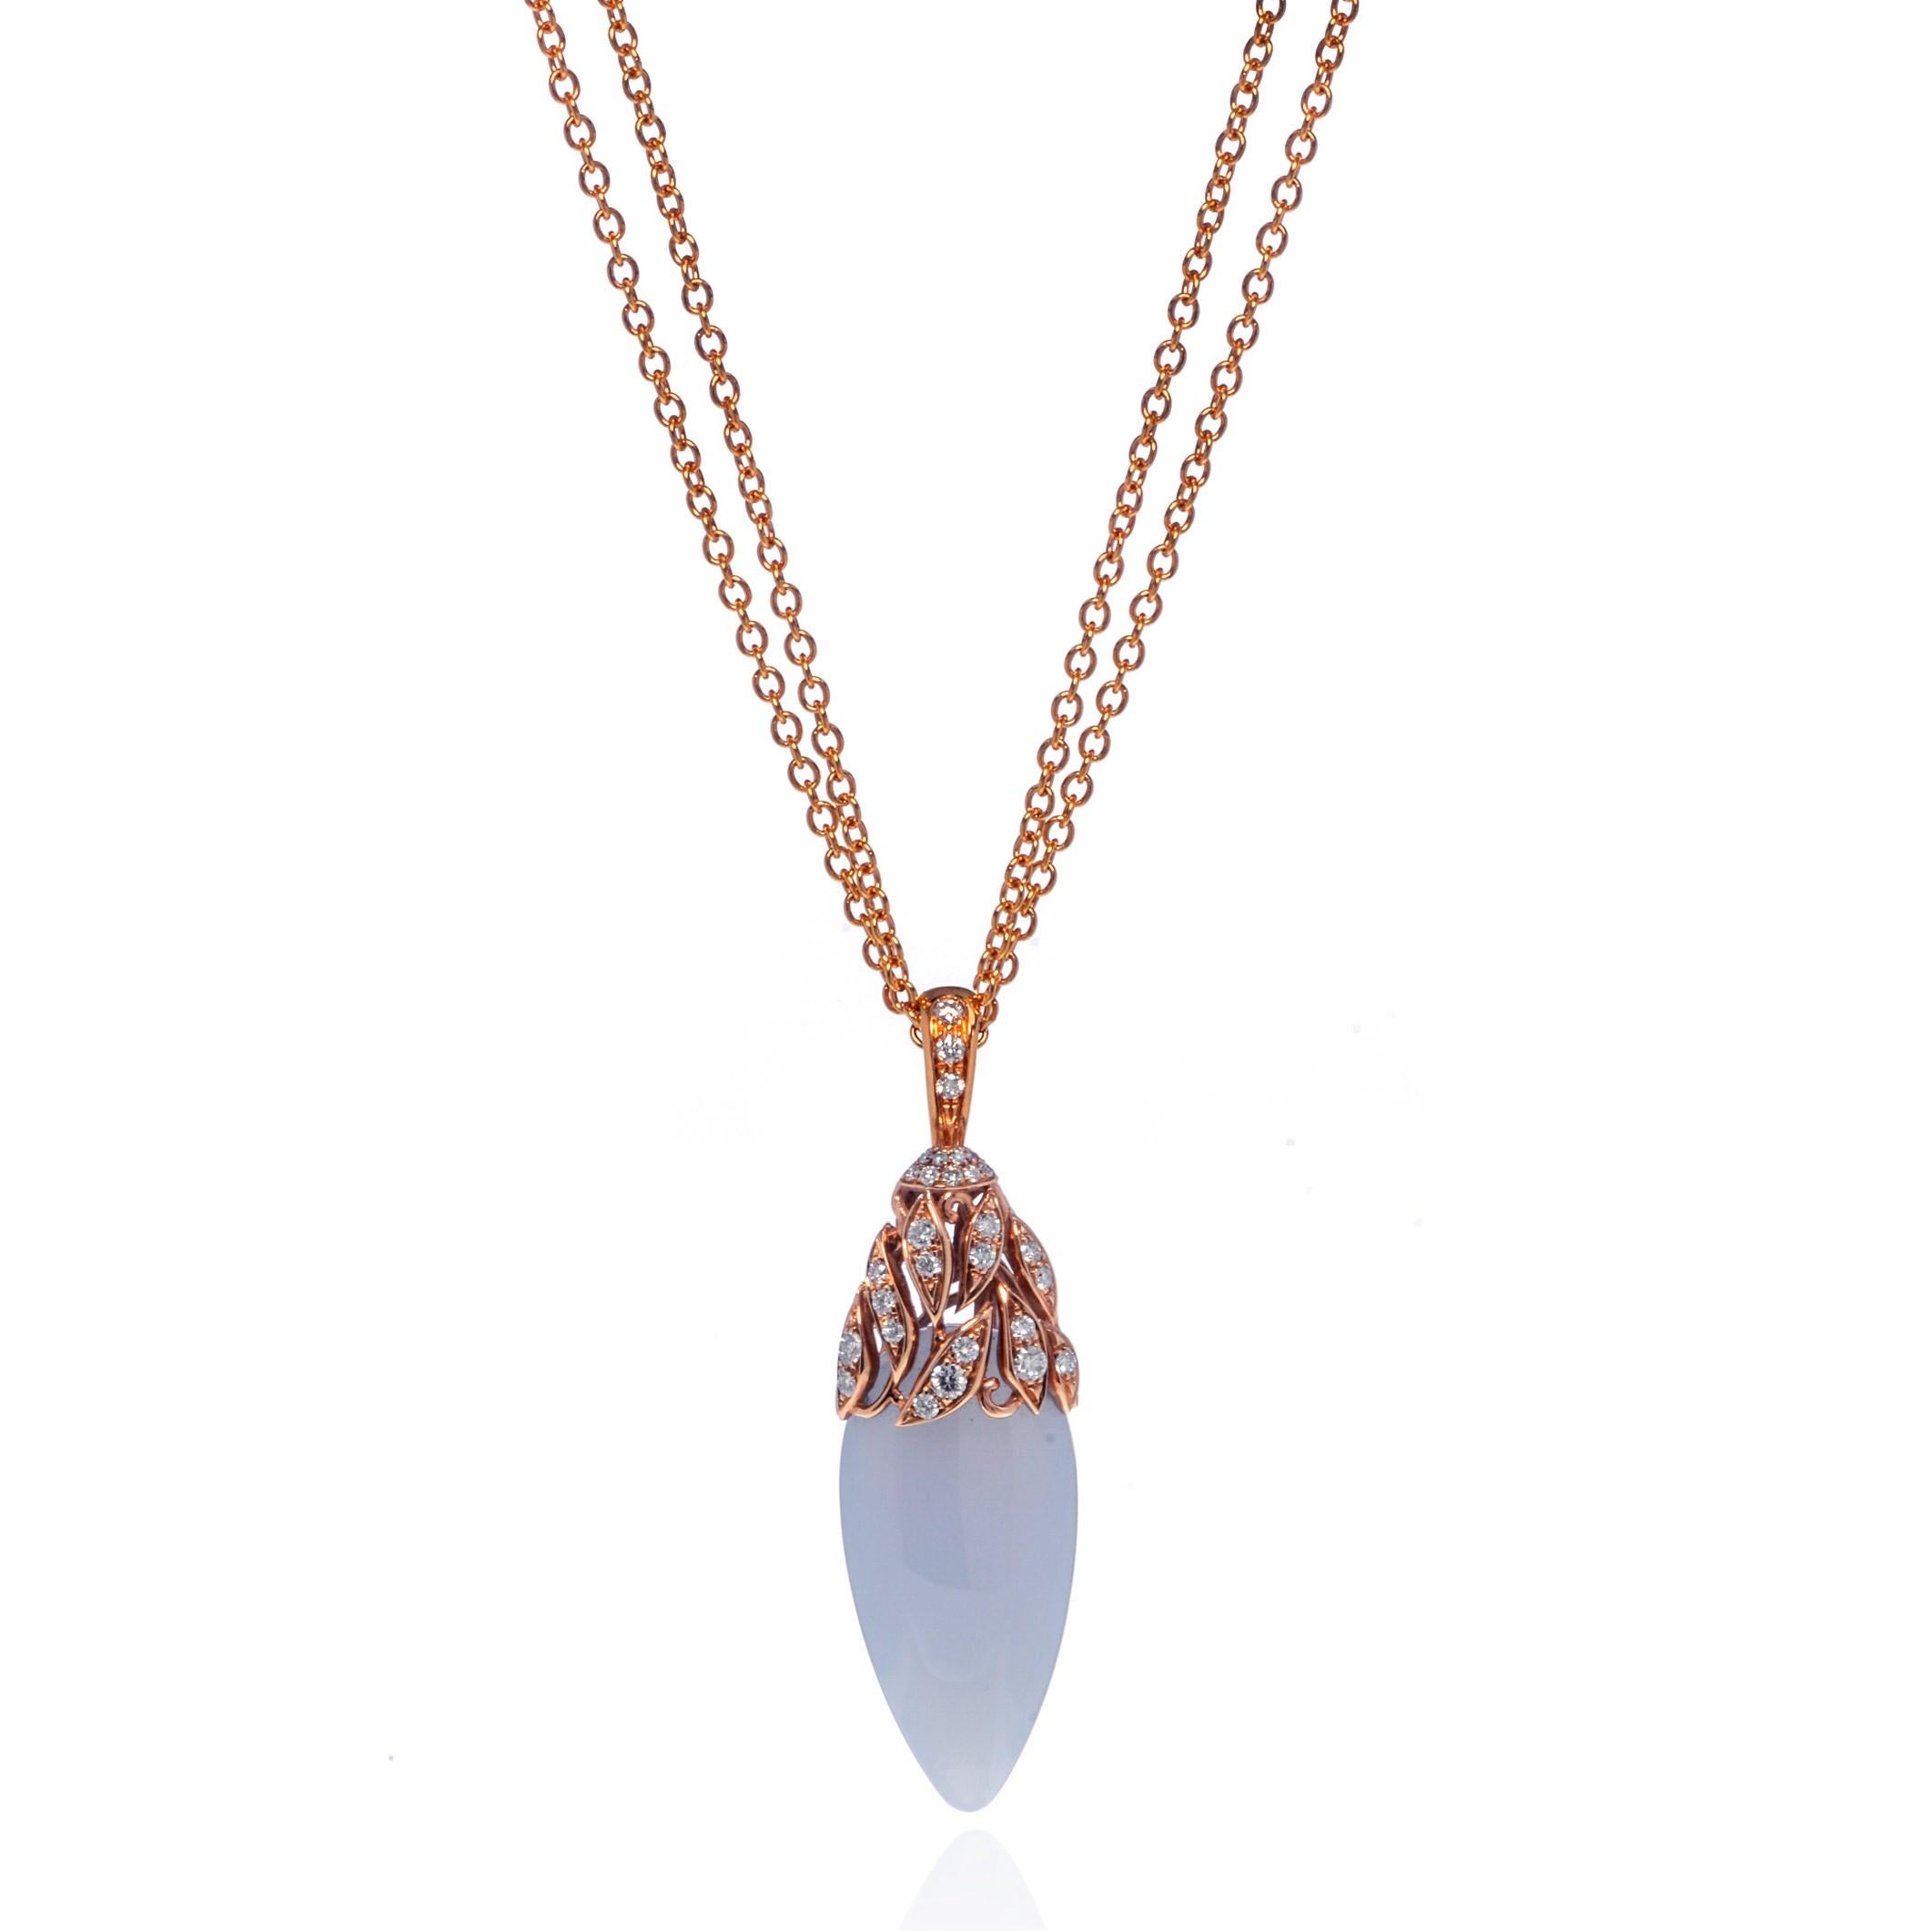 Beautiful Chalcedony and diamond pendant necklace from Luca Carati. Crafted in 18K Rose Gold. Total chalcedony weight: 5.40 grams. Total diamond weight: 0.45cts. Diamonds are color G and VVS clarity. Chain length: 34 inches. Comes with a box and